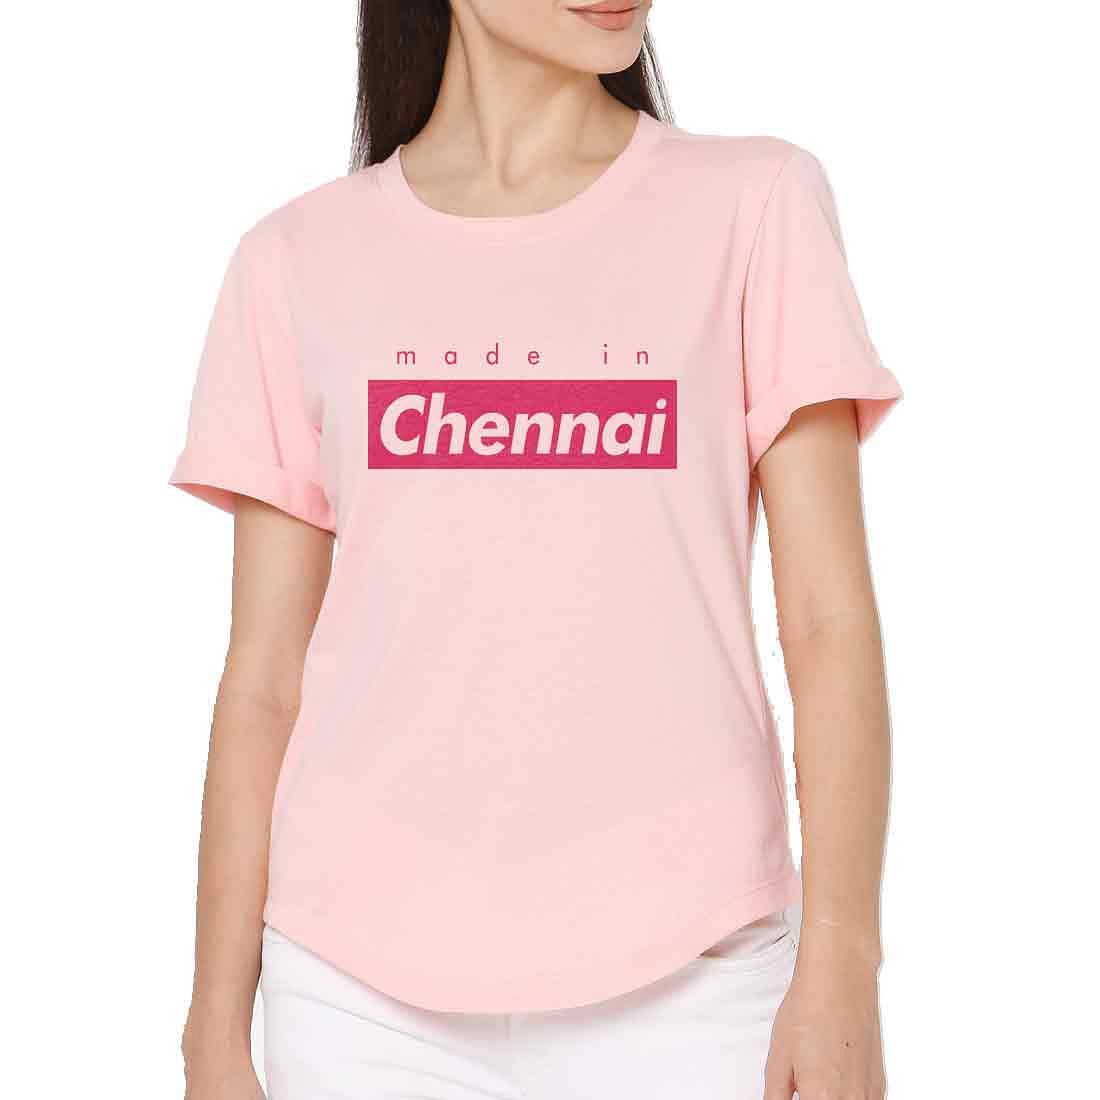 Funny T Shirts For Women Madras City Tees - Made In Chennai Nutcase